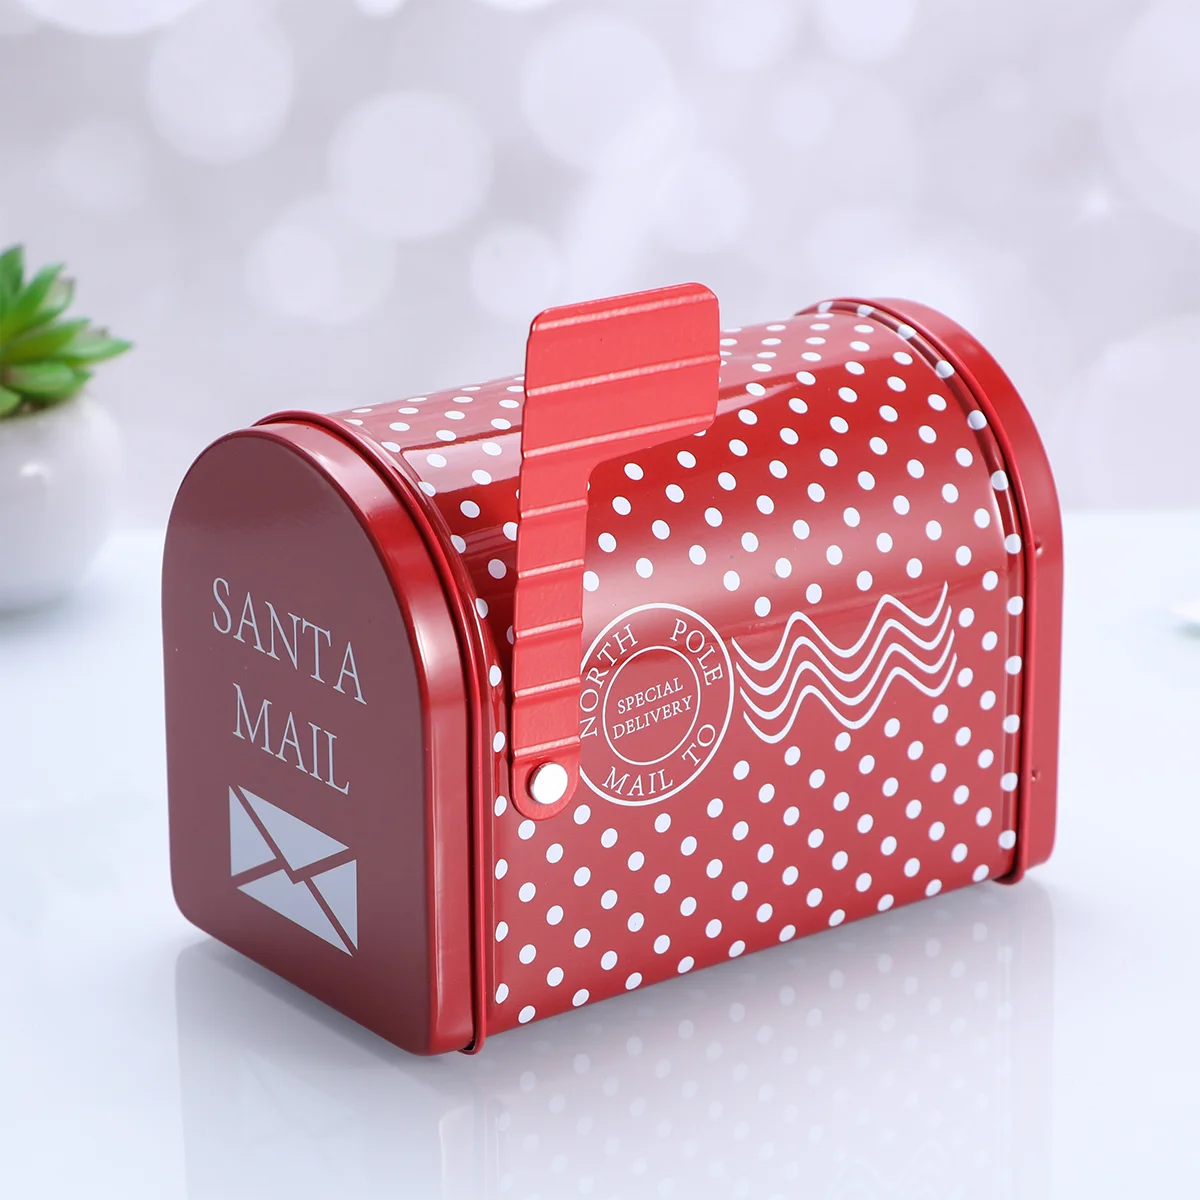 

Christmas Box Candy Gift Tin Boxes Mailbox Treat Tinscookie Containers Favor Favors Decorative Tinplate Present Holiday Eve